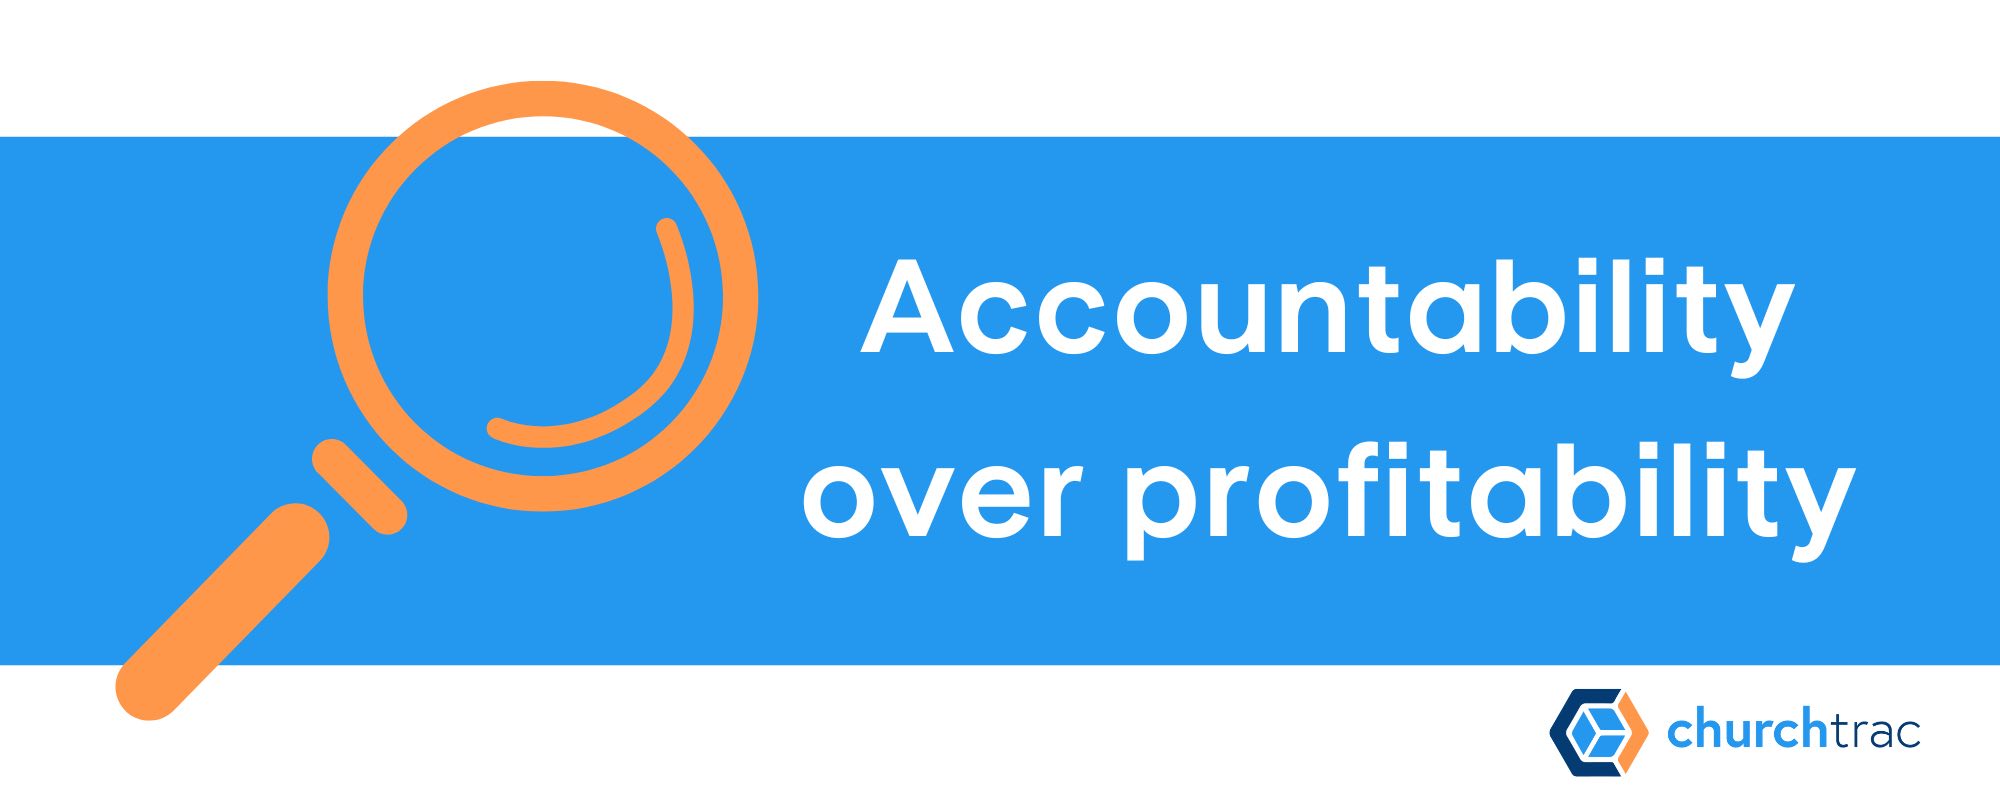 Fund accounting prioritizes accountability over profitability for small churches, average churches, and nonprofits